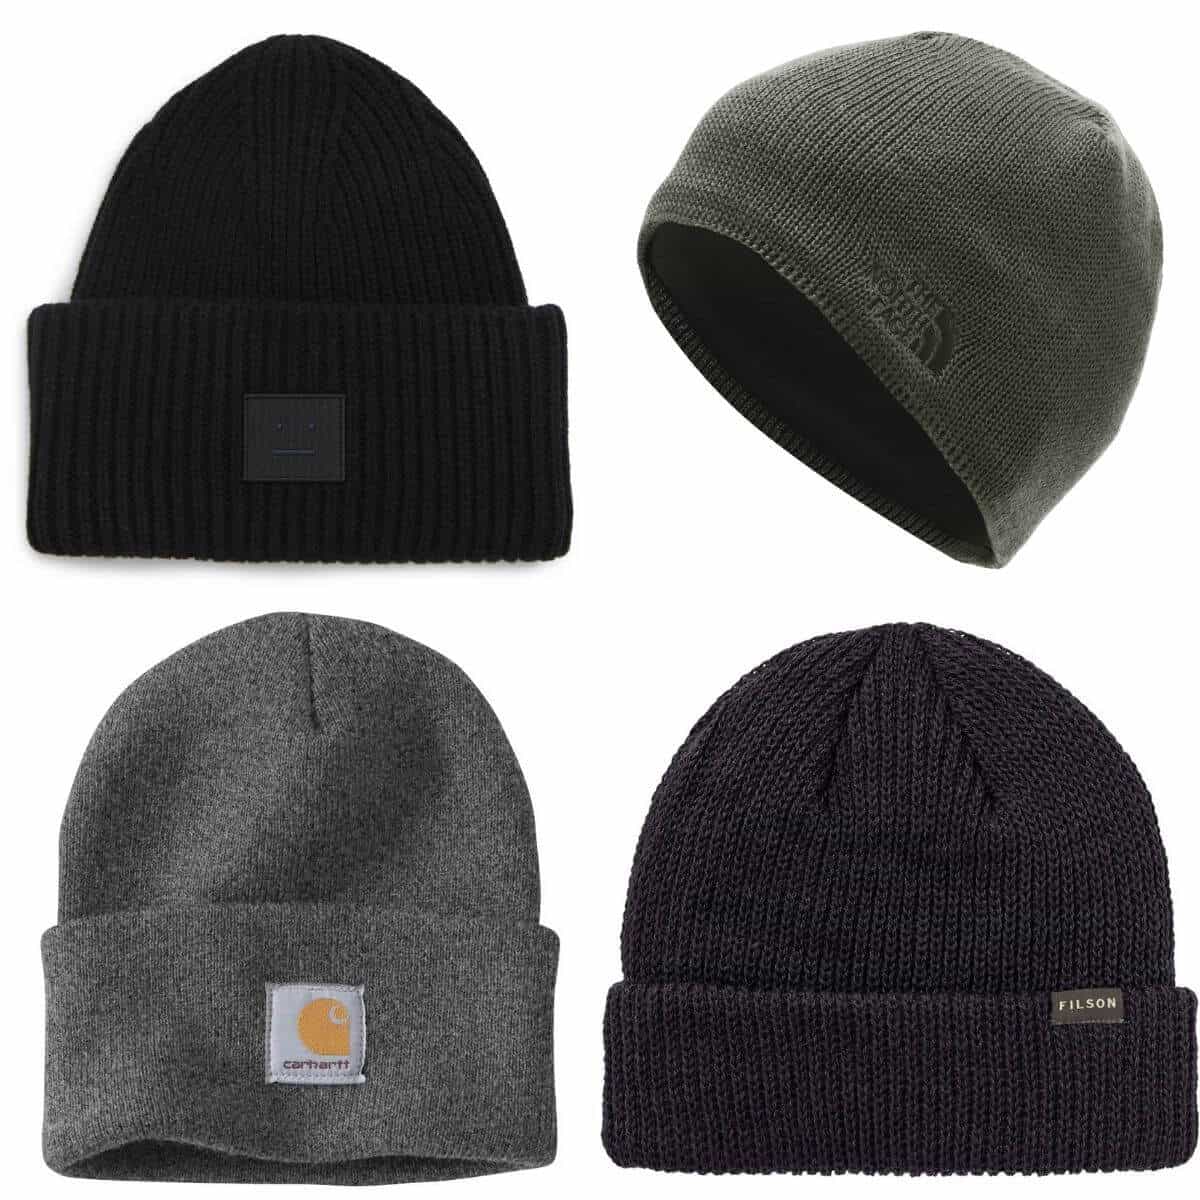 Four different beanies.